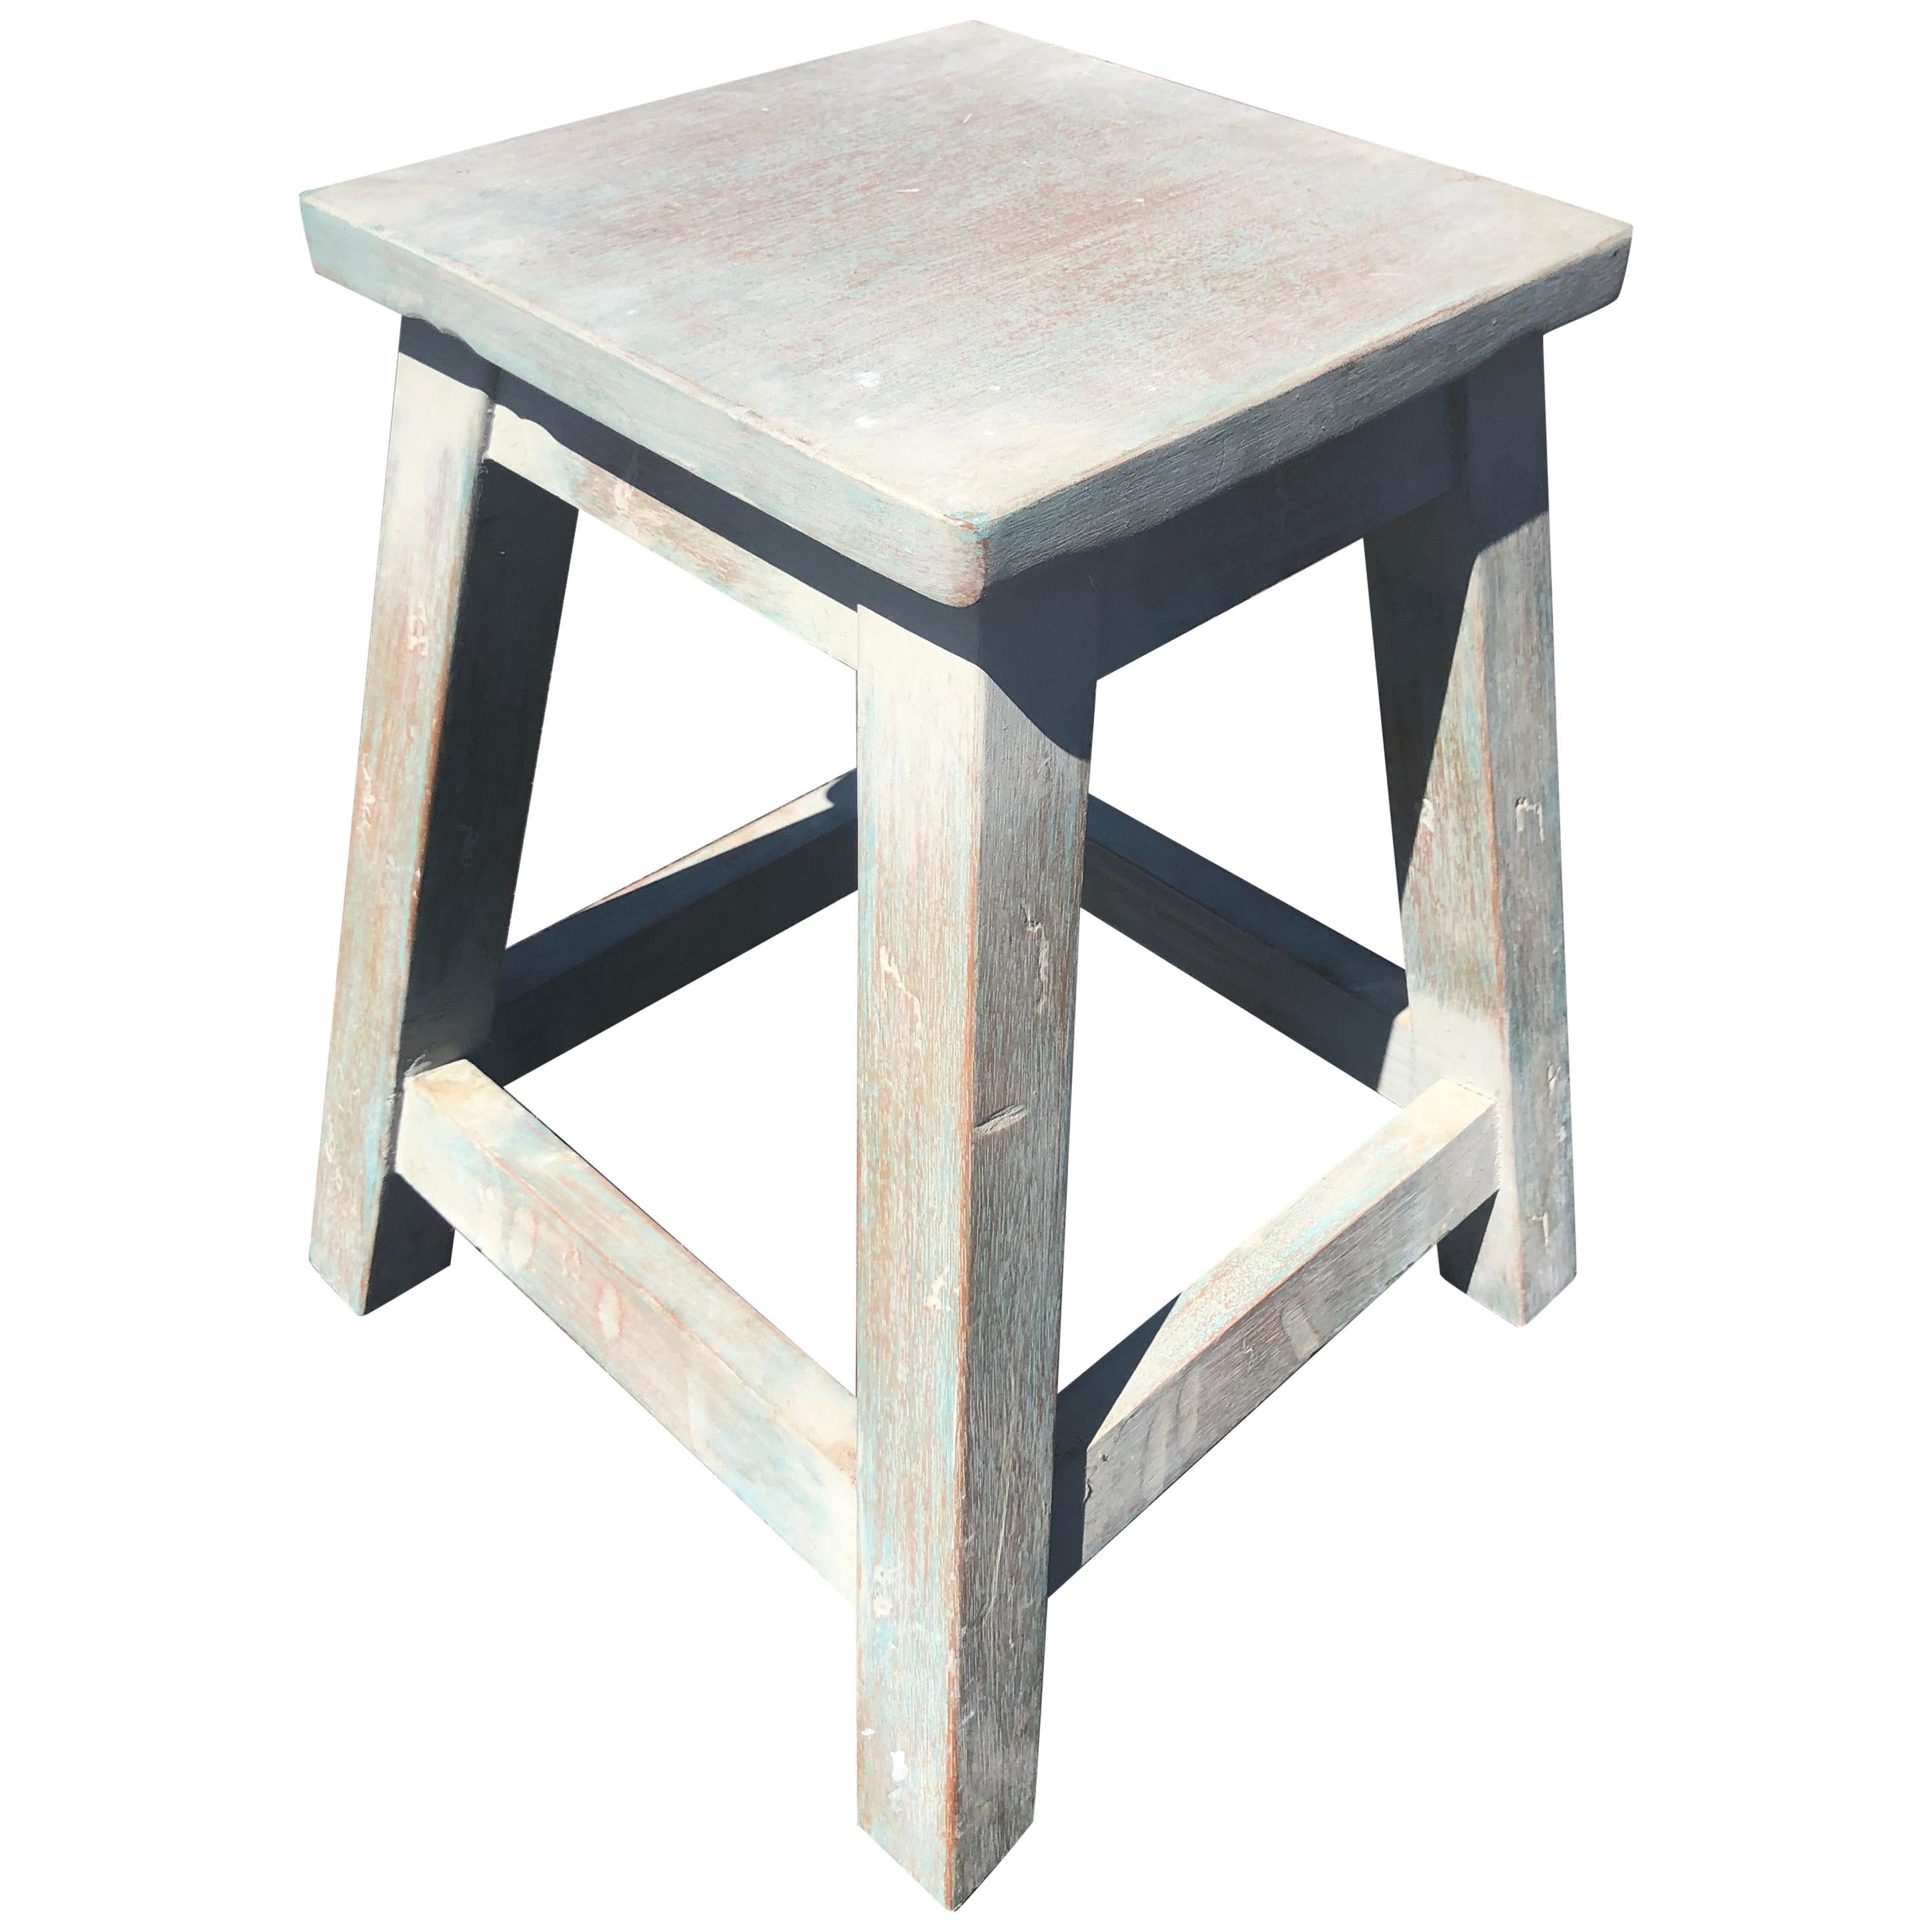 Painted Pine Stool or Small Table